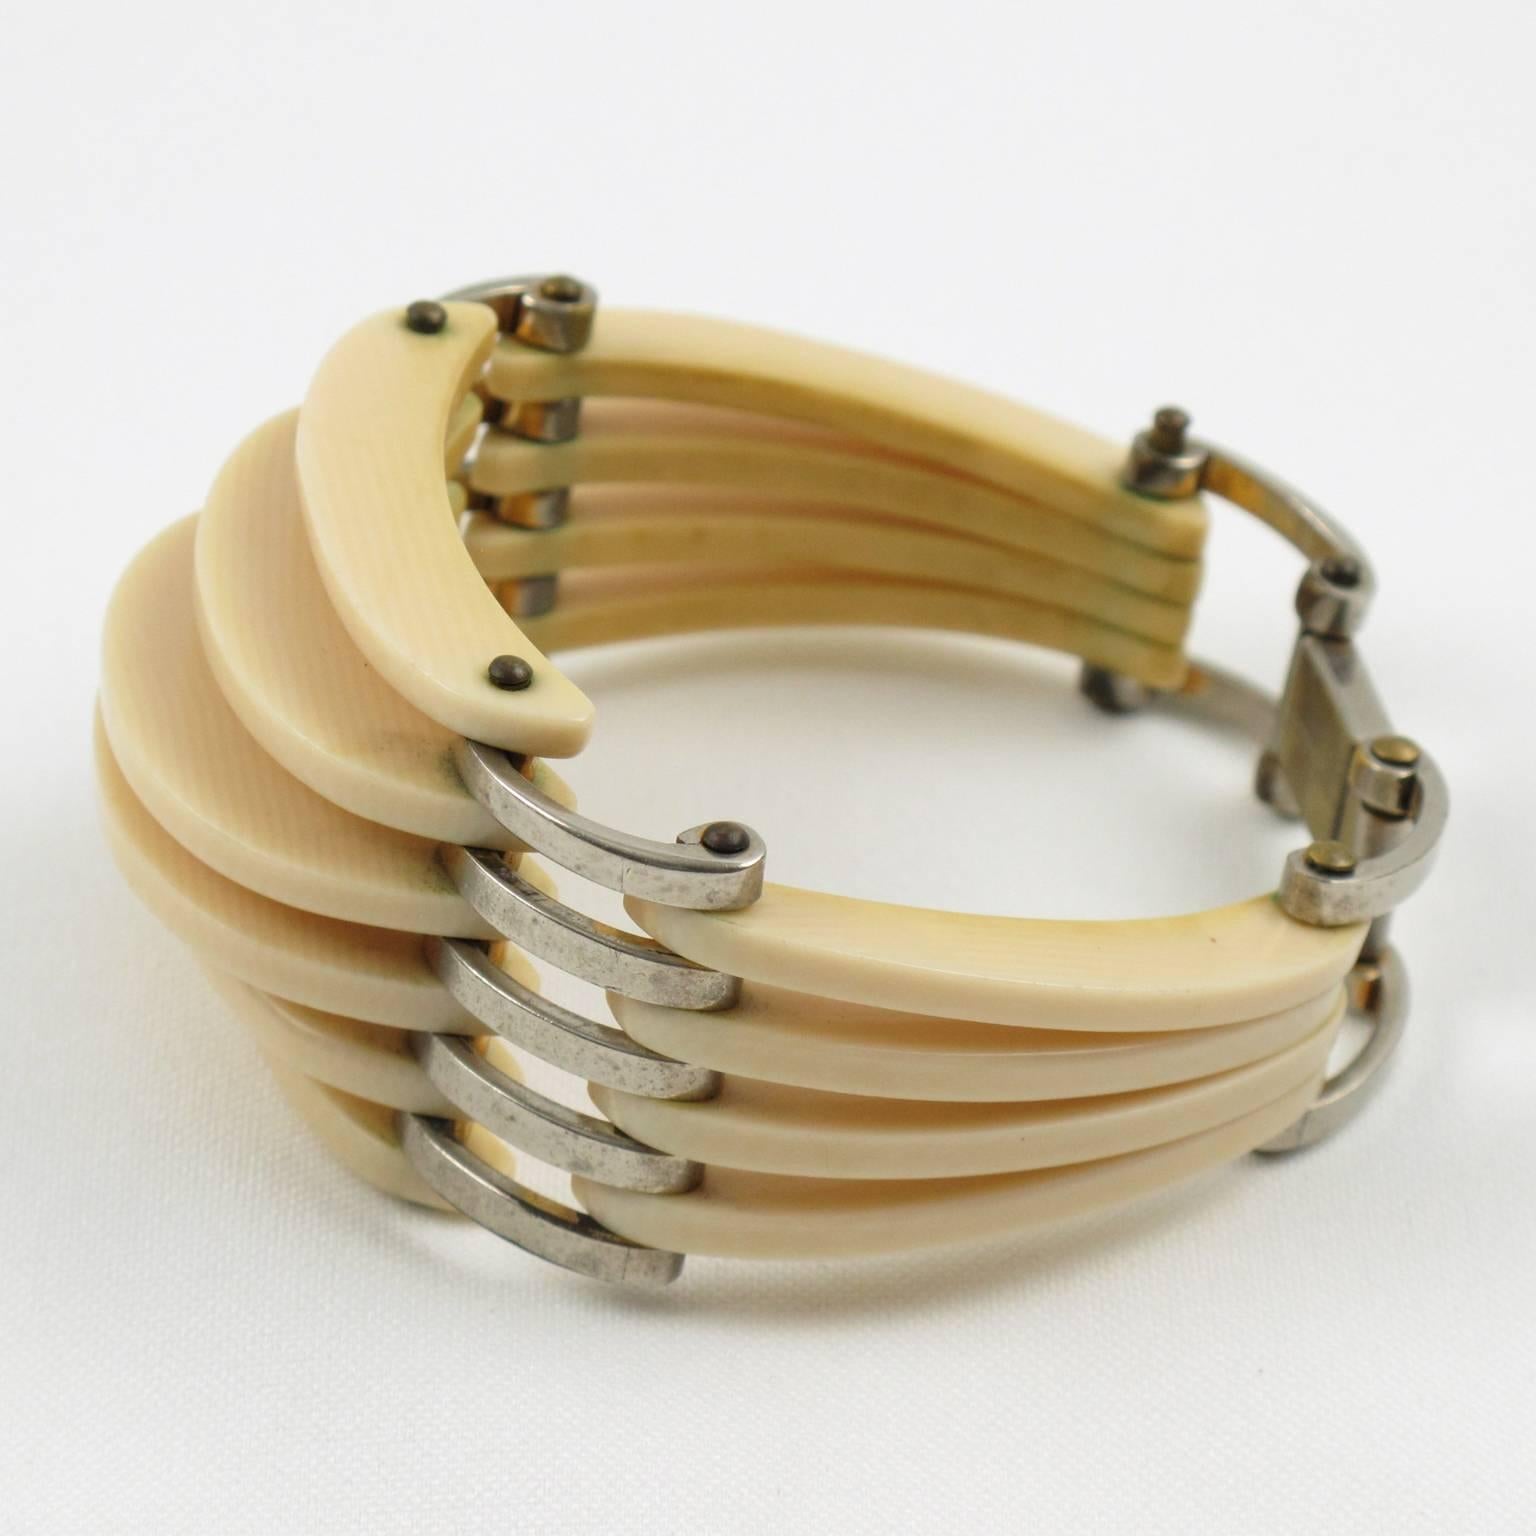 Sculptural French Art Deco White Galalith & Chrome Carved Grill Bracelet 1